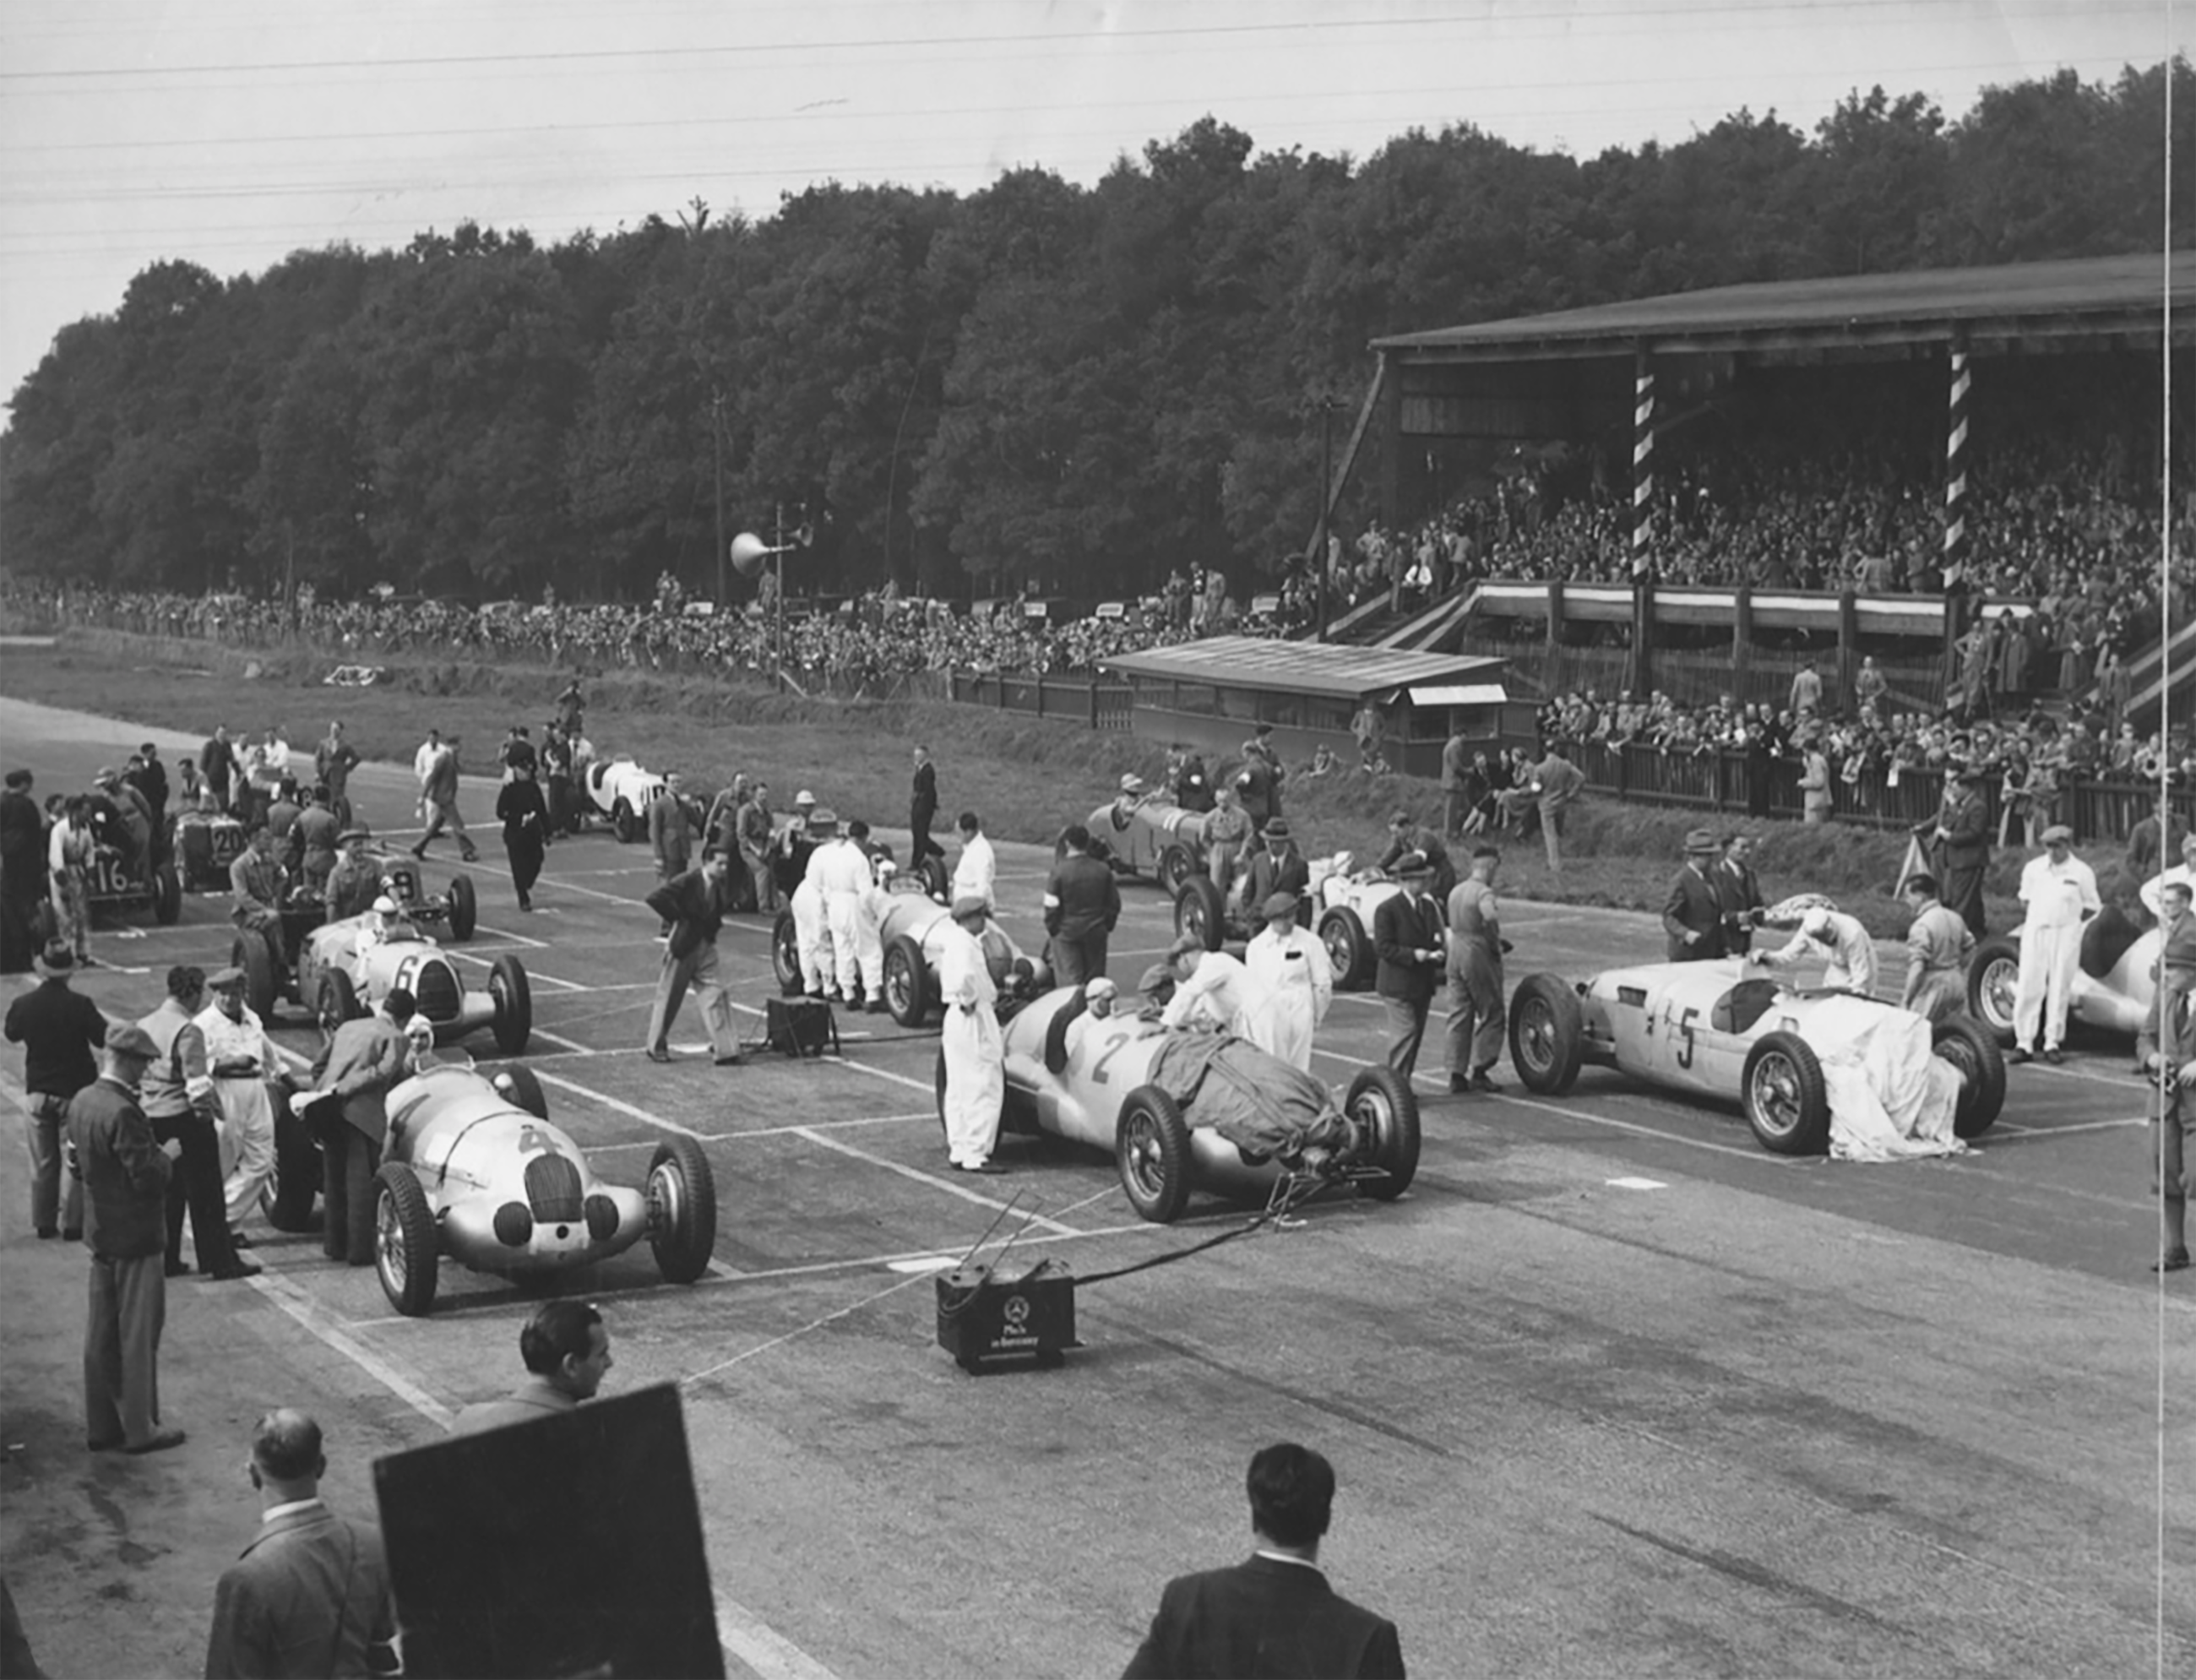 Donington’s most wonderful Grand Prix grid - lining up for the 1937 event won by Bernd Rosemeyer for Auto Union, beating the works Mercedes-Benz flotilla